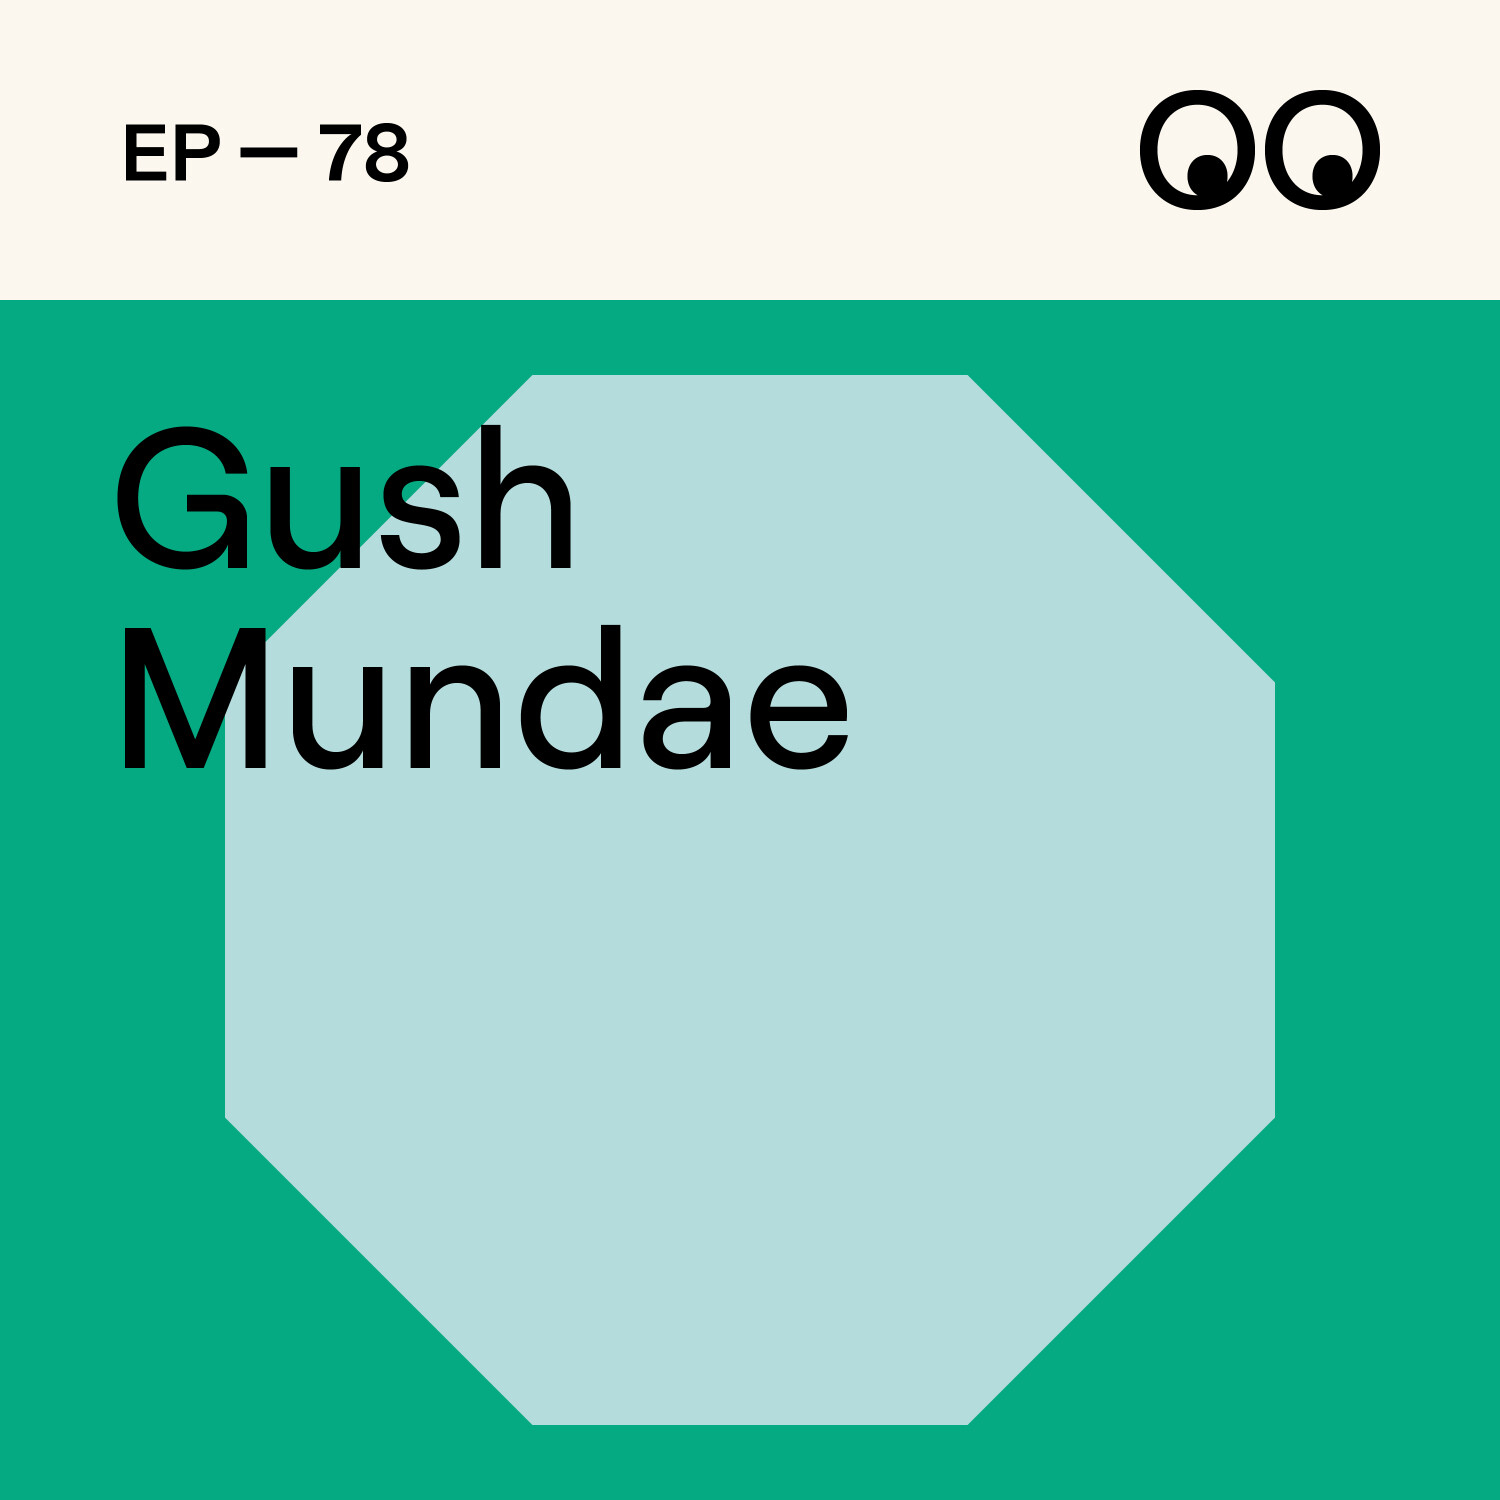 Finding a place in Britain to grow an agency from scratch, with Gush Mundae